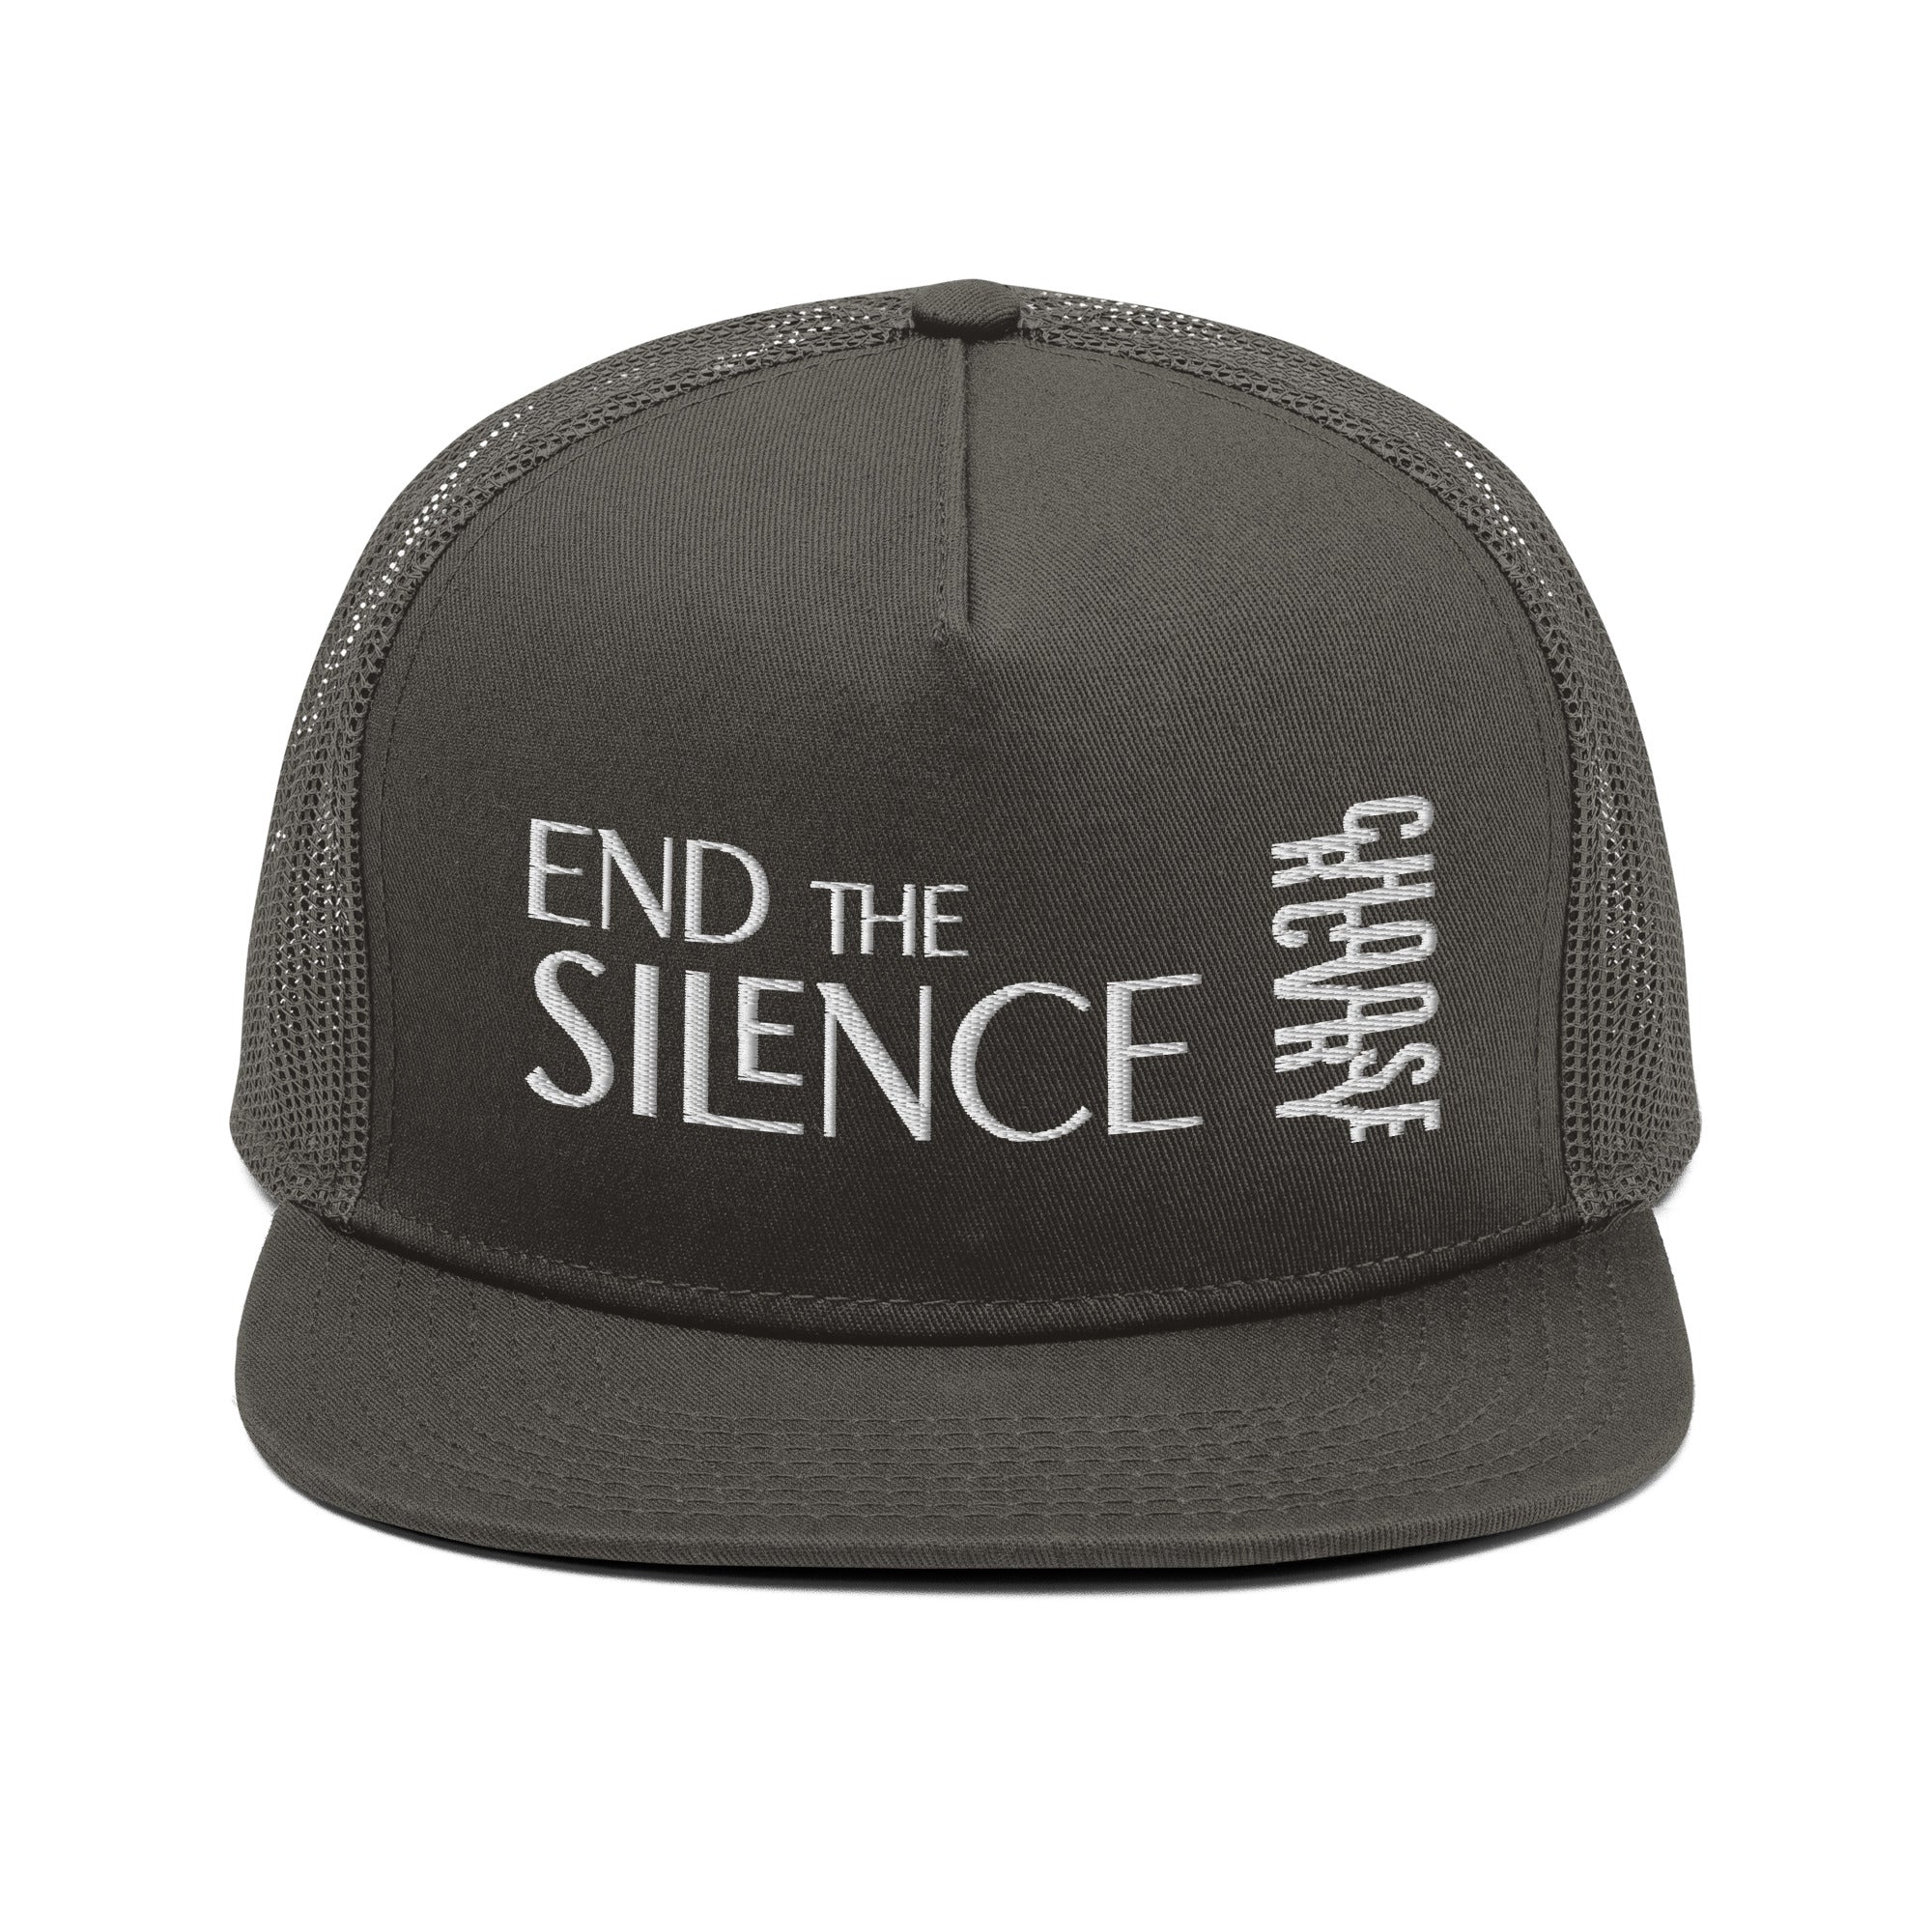 End the Silence Snapack Flat Bill Hat